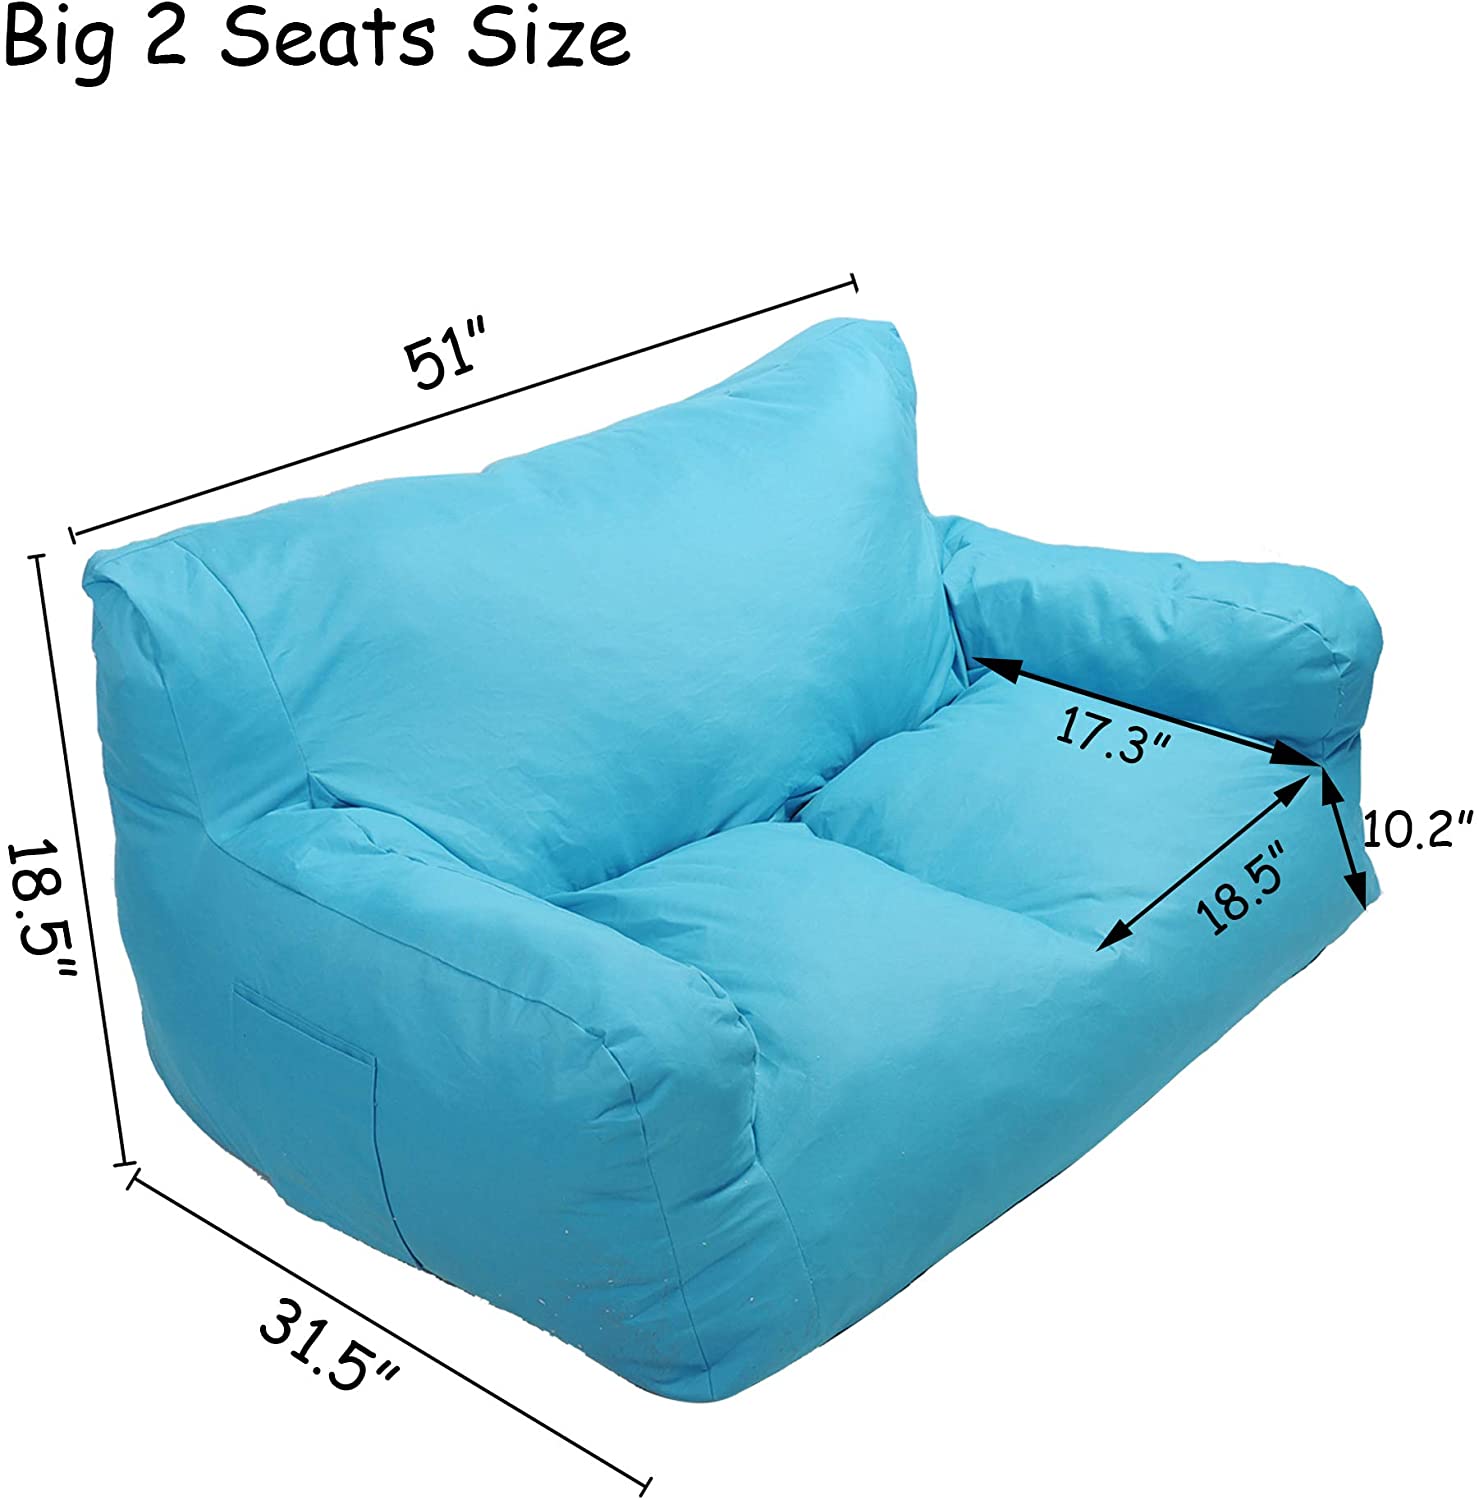 Blue Bean Bag Chair Kids Self-Inflated Sponge Stuffed Beanless Dorm Chair for Adults,Double Seats Sofa Lounger Couch Furniture for Indoor and Outdoor